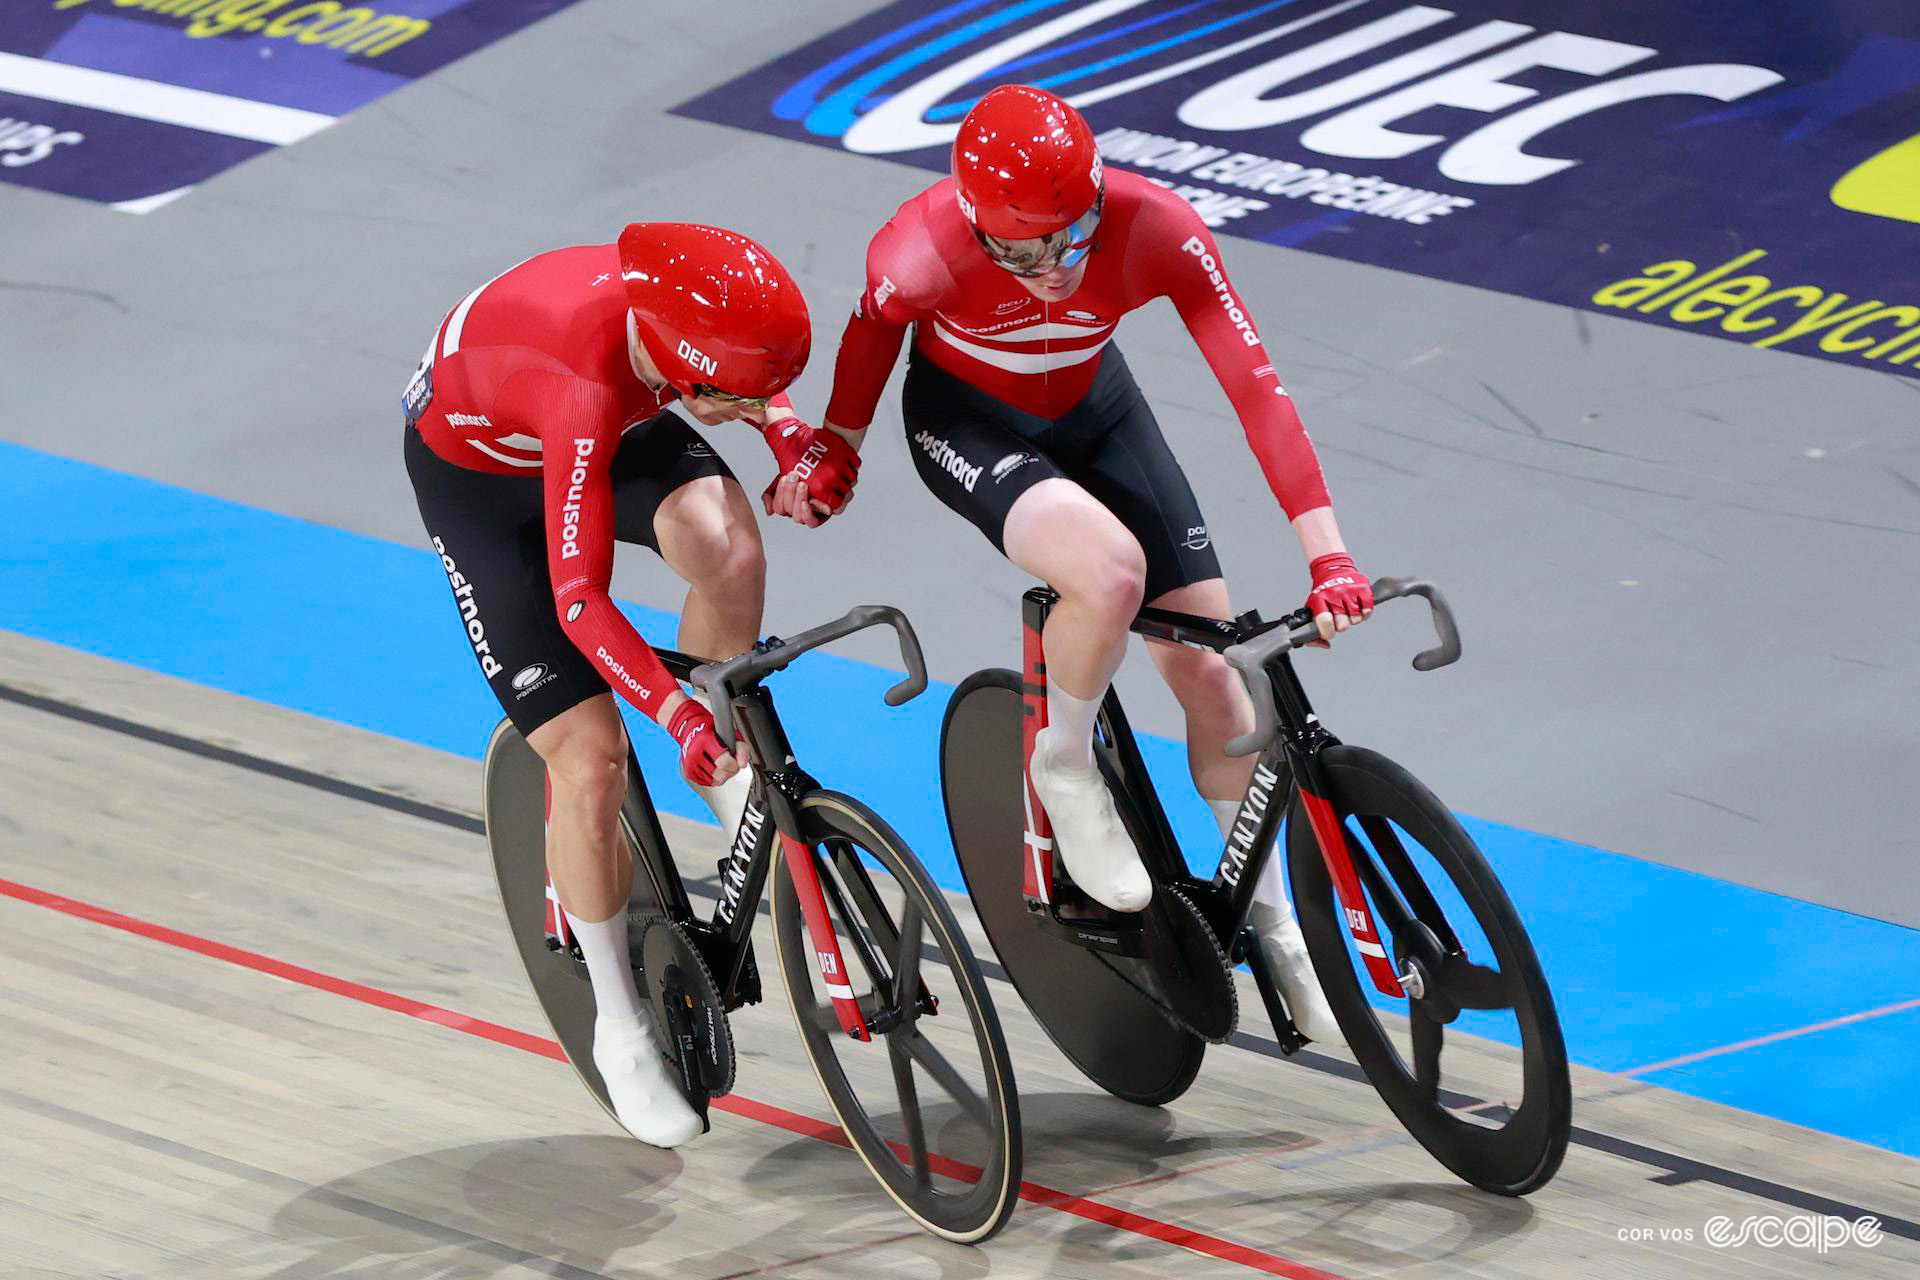 Danish pairing Michael Mørkøv and Theodor Storm during the Madison at the 2024 European Track Championships.